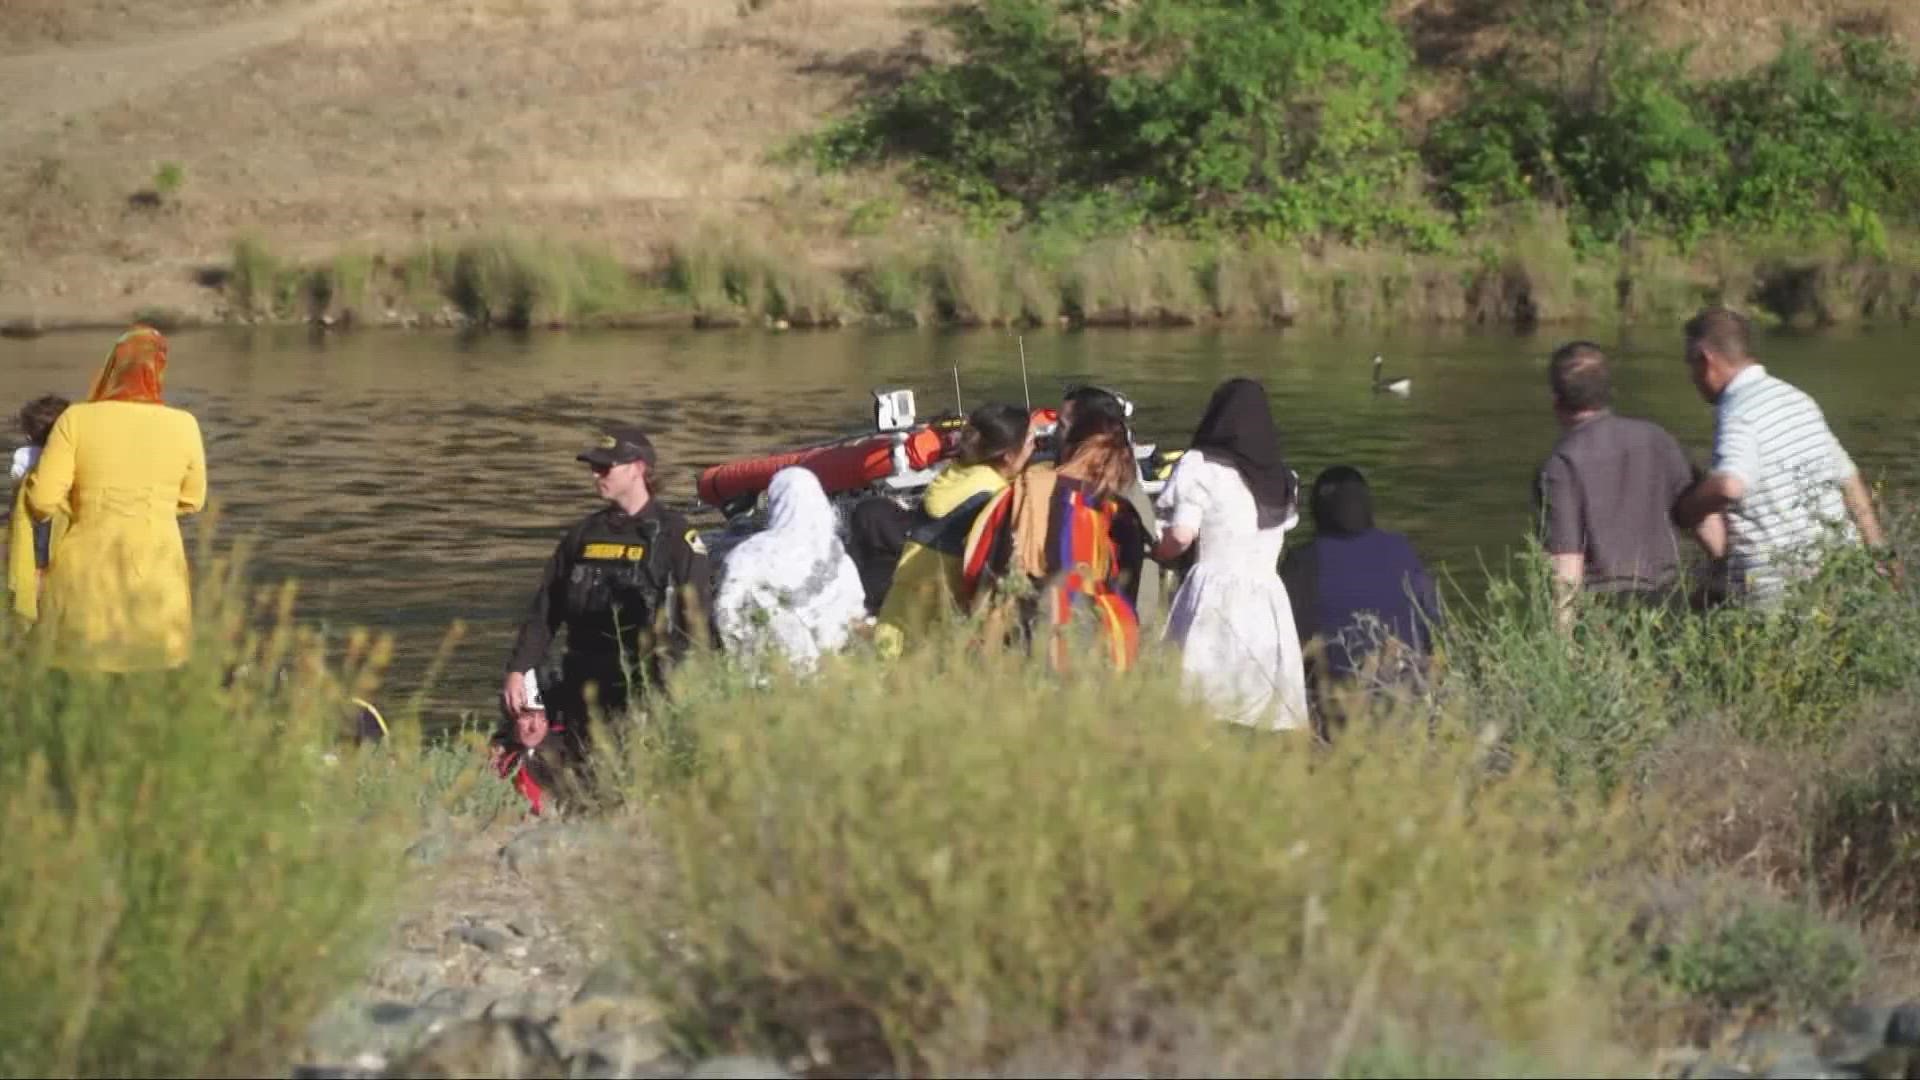 A family member told ABC10 that a man pulled from the American River by Sacramento Metropolitan firefighters has died.